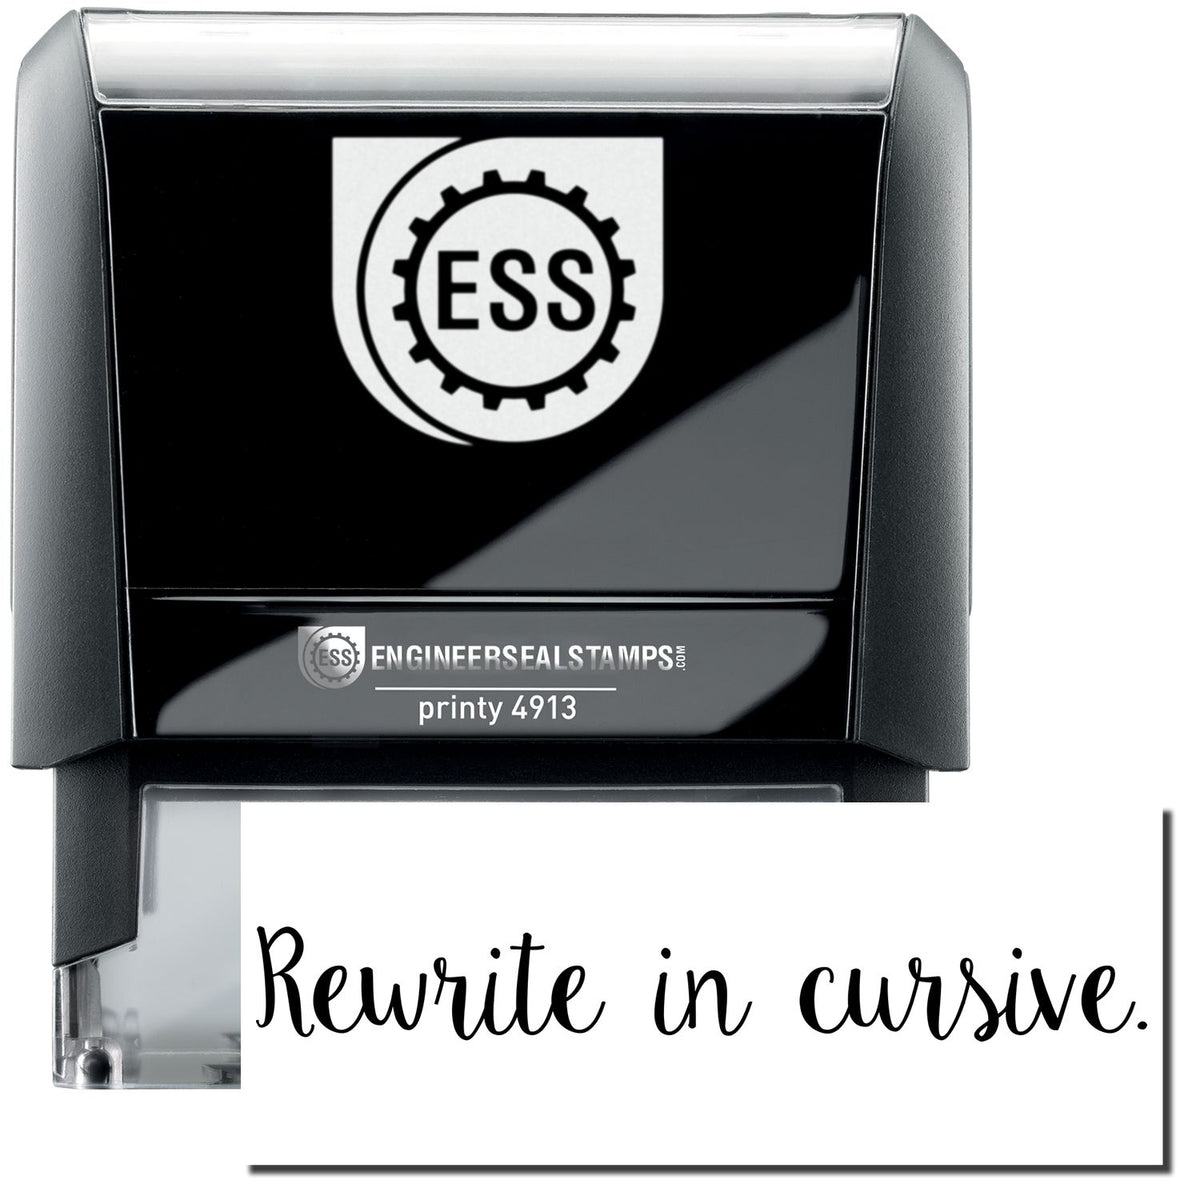 A self-inking stamp with a stamped image showing how the text &quot;Rewrite in cursive.&quot; in a large cursive font is displayed by it after stamping.